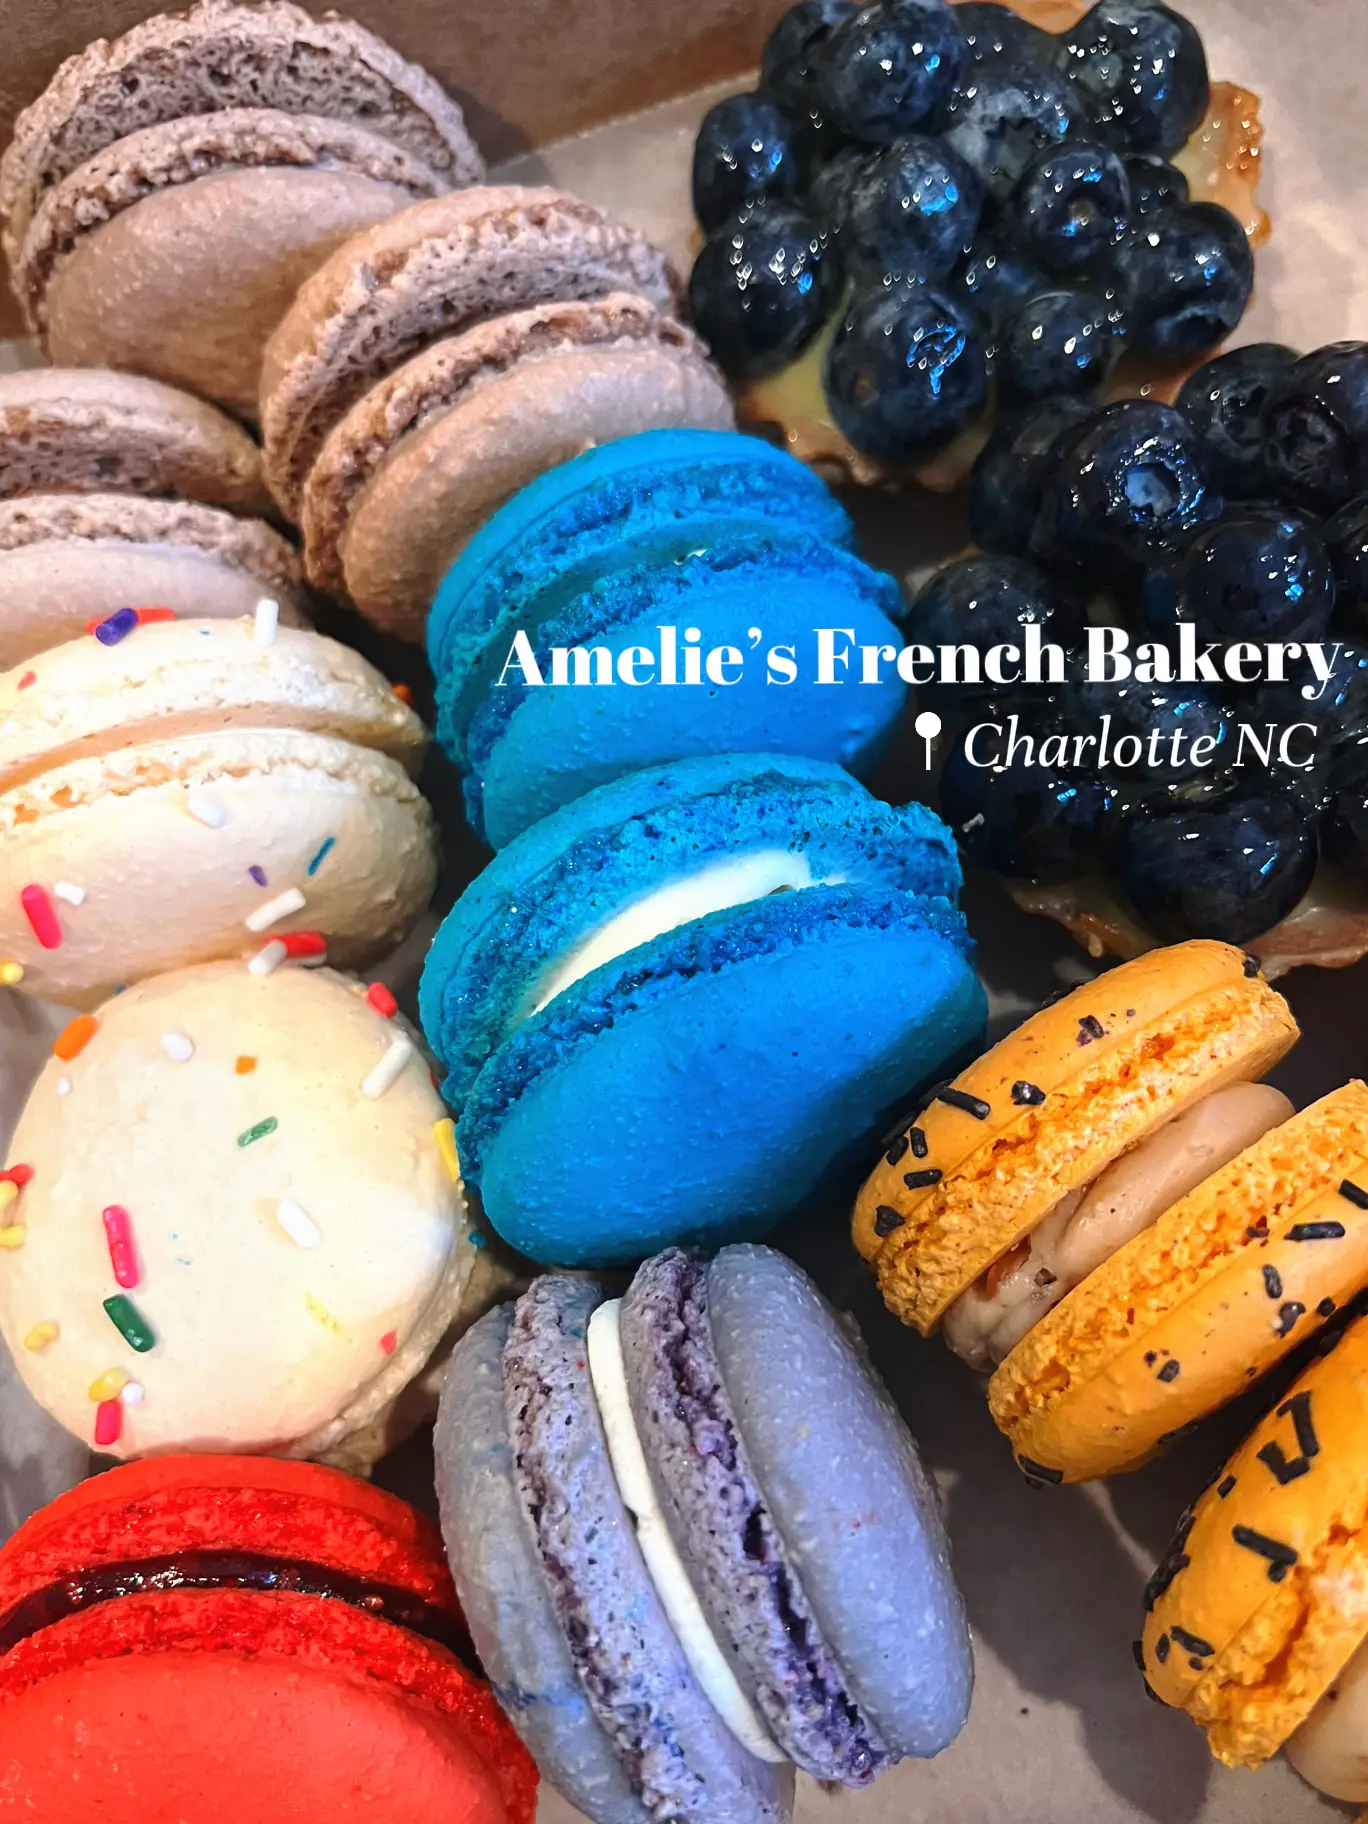 Amélie’s French Bakery | Charlotte NC's images